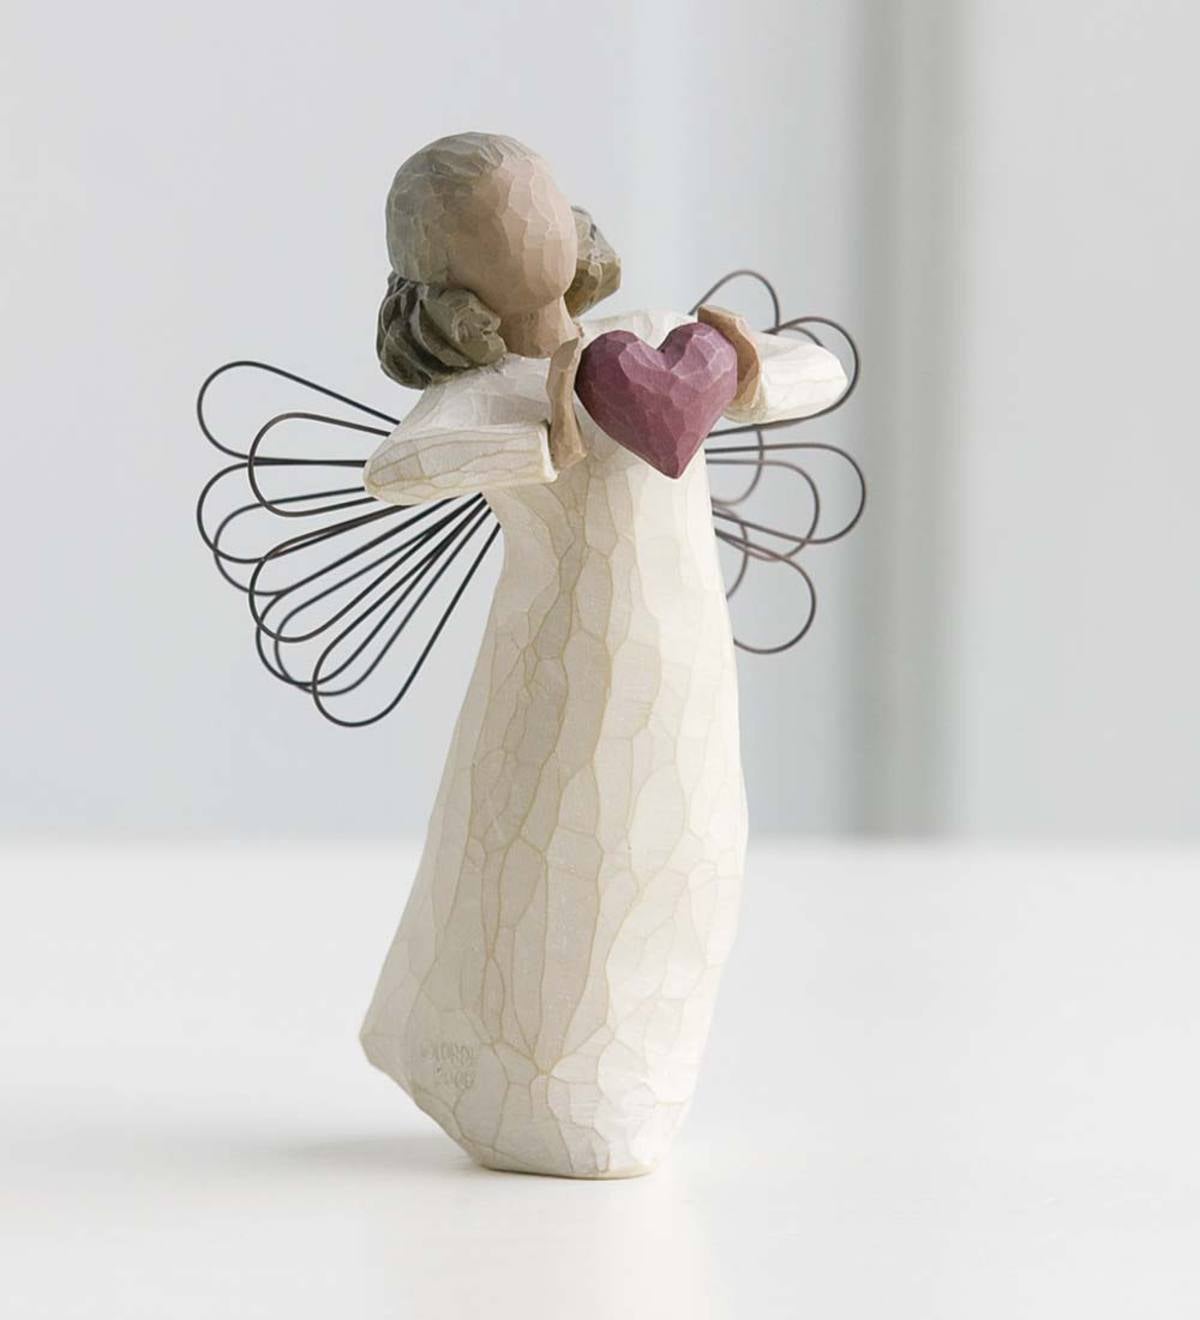 Willow Tree "With Love" Figurine